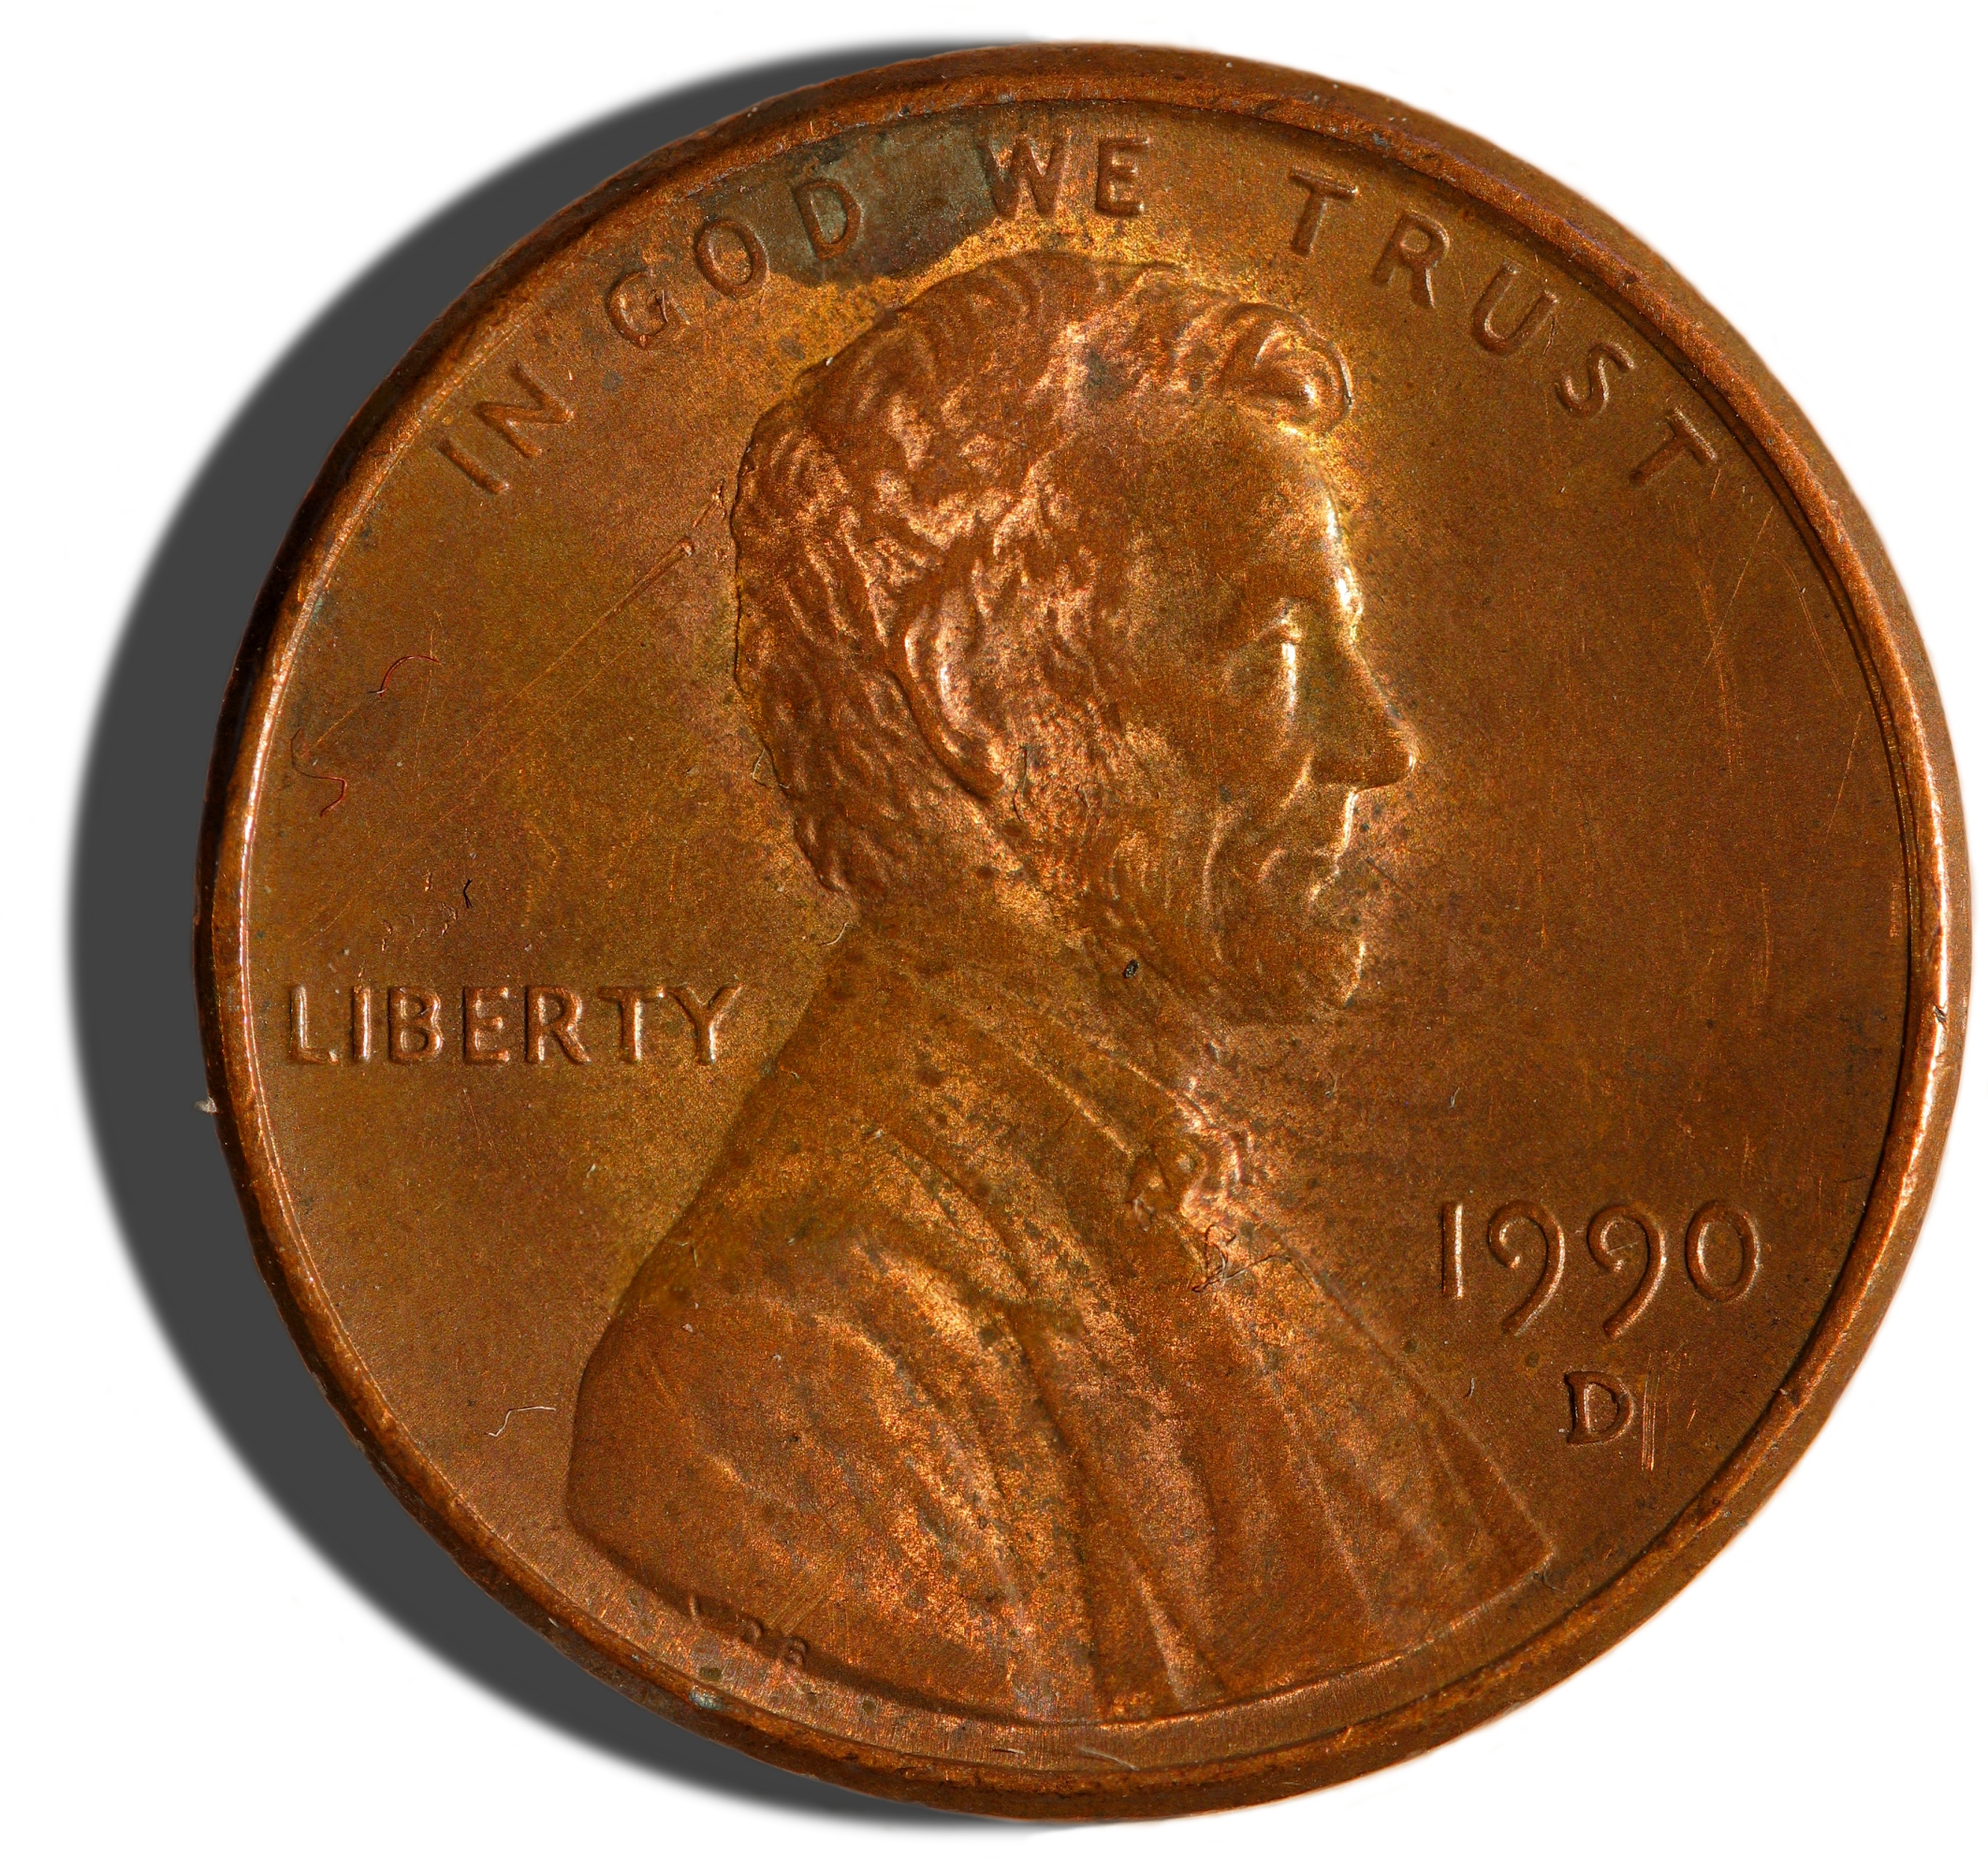 1990-issue US Penny obverse